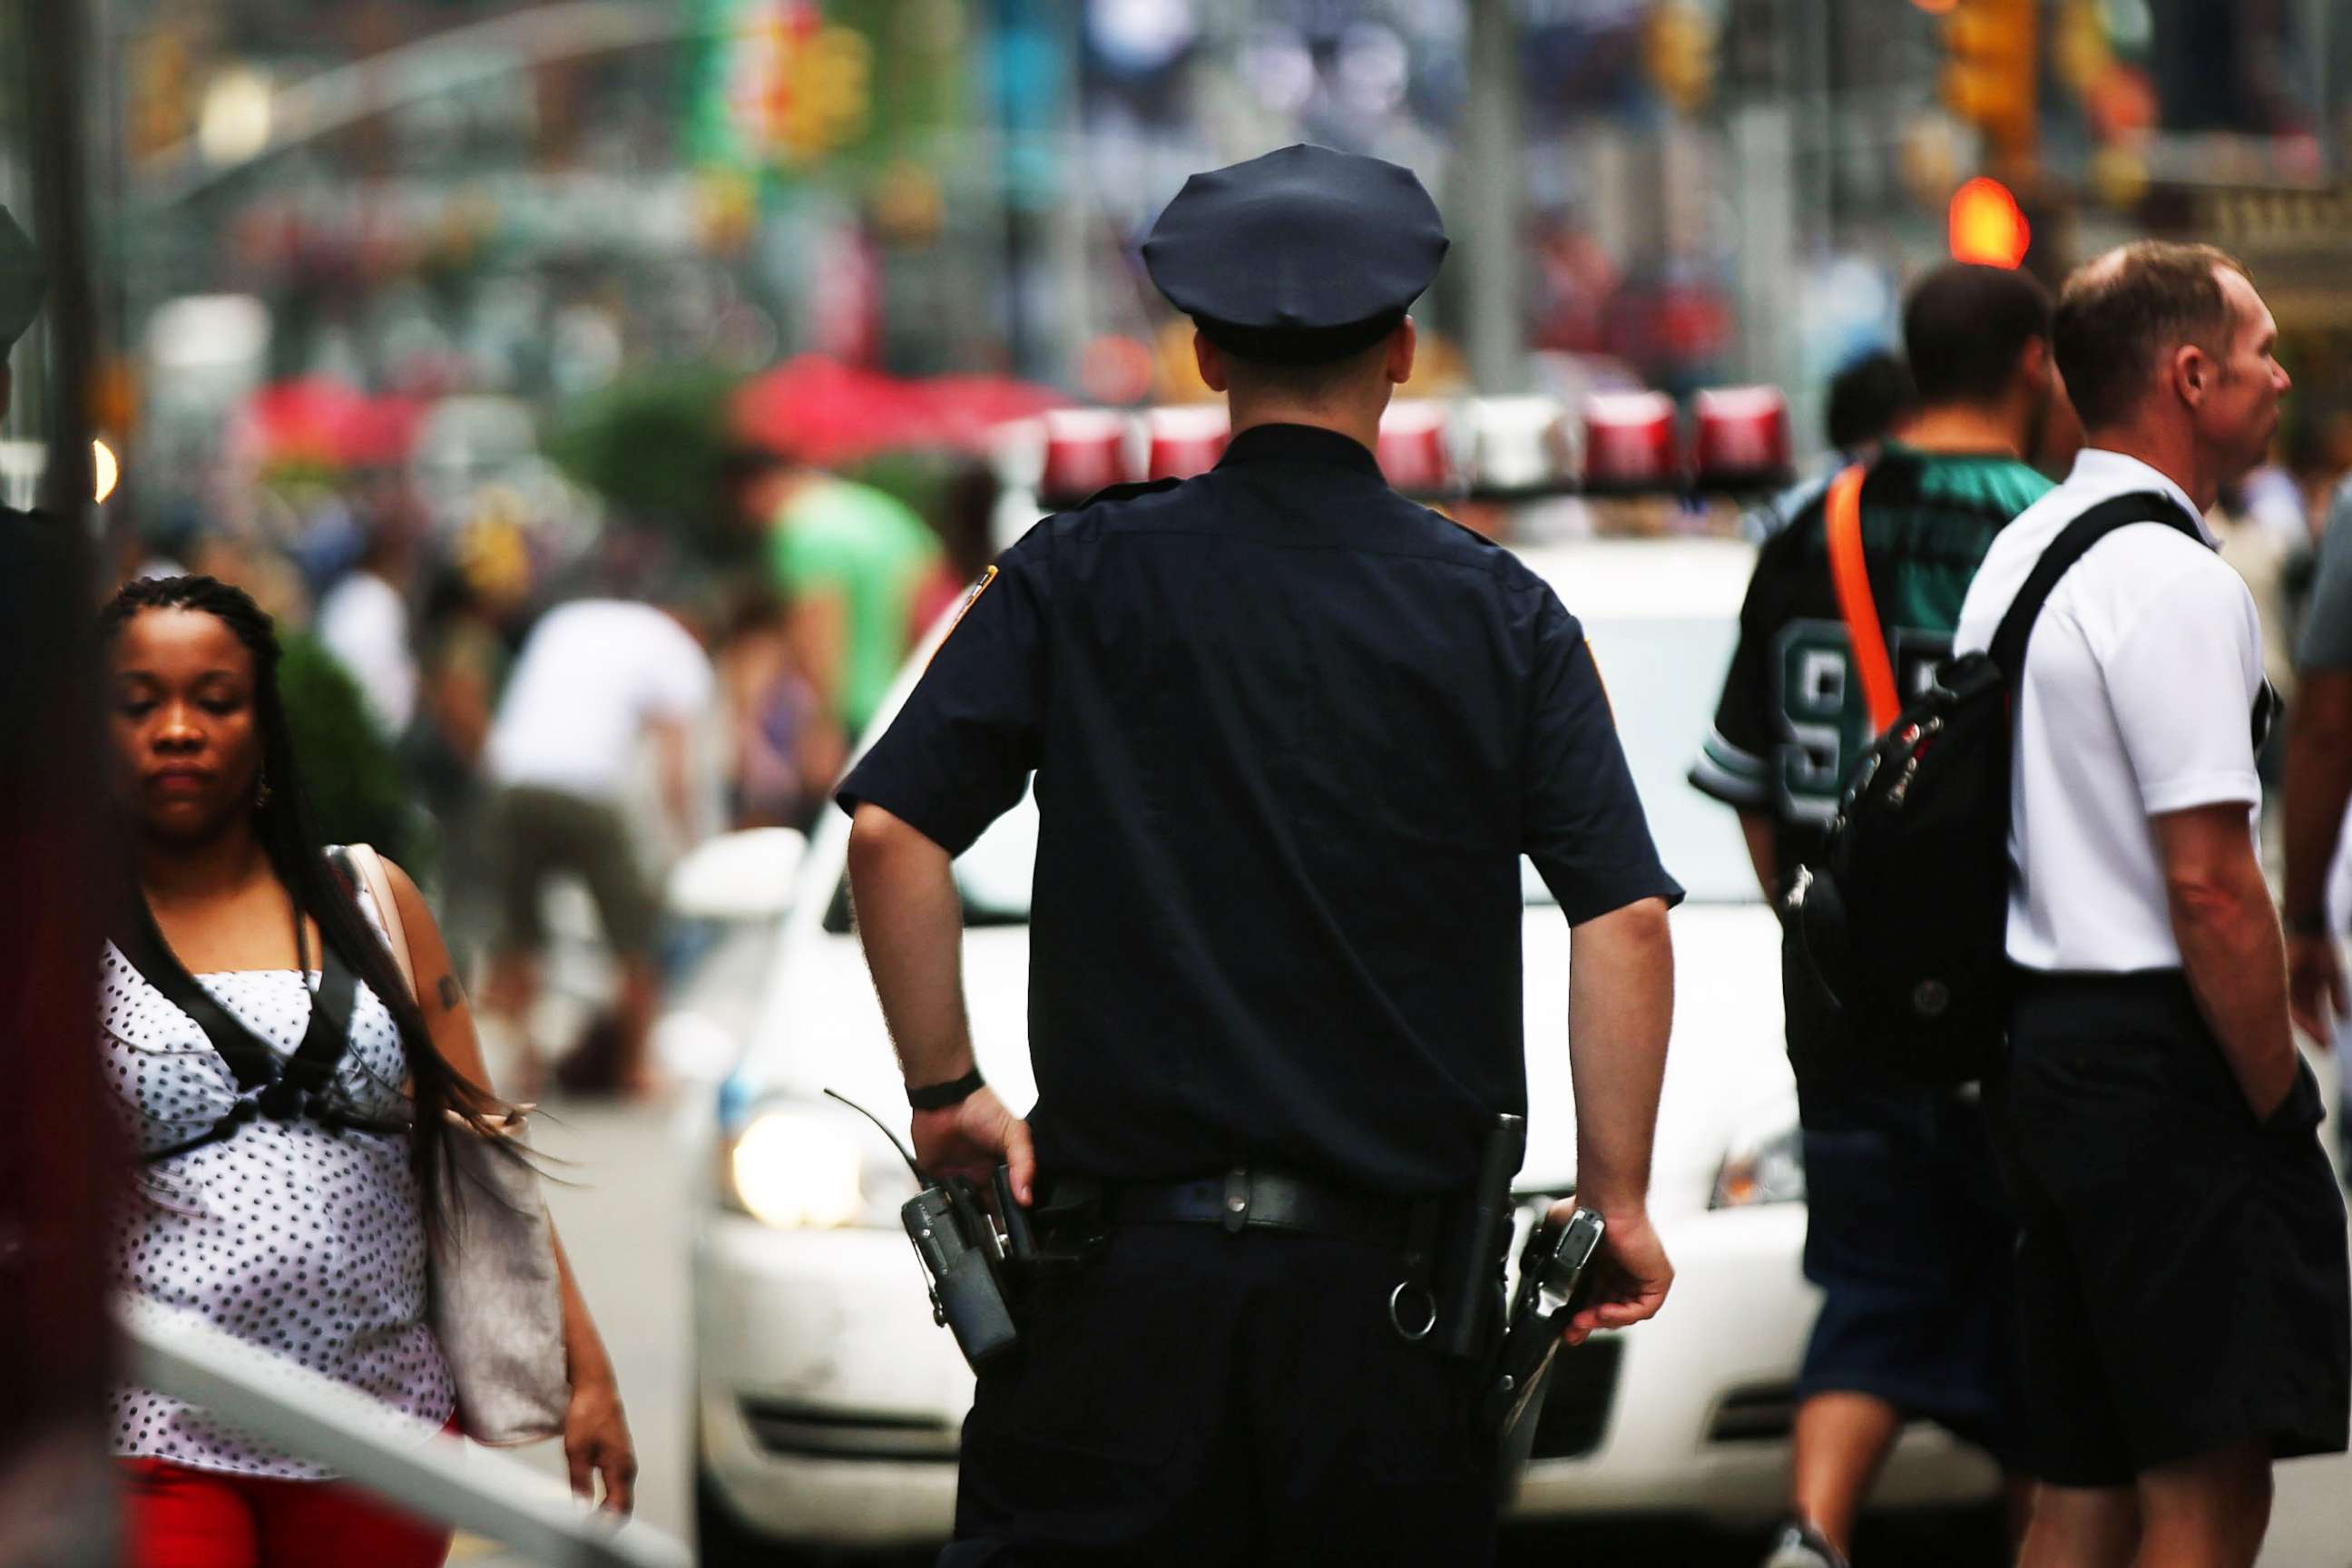 PHOTO: A New York City police officer stands in Times Square.